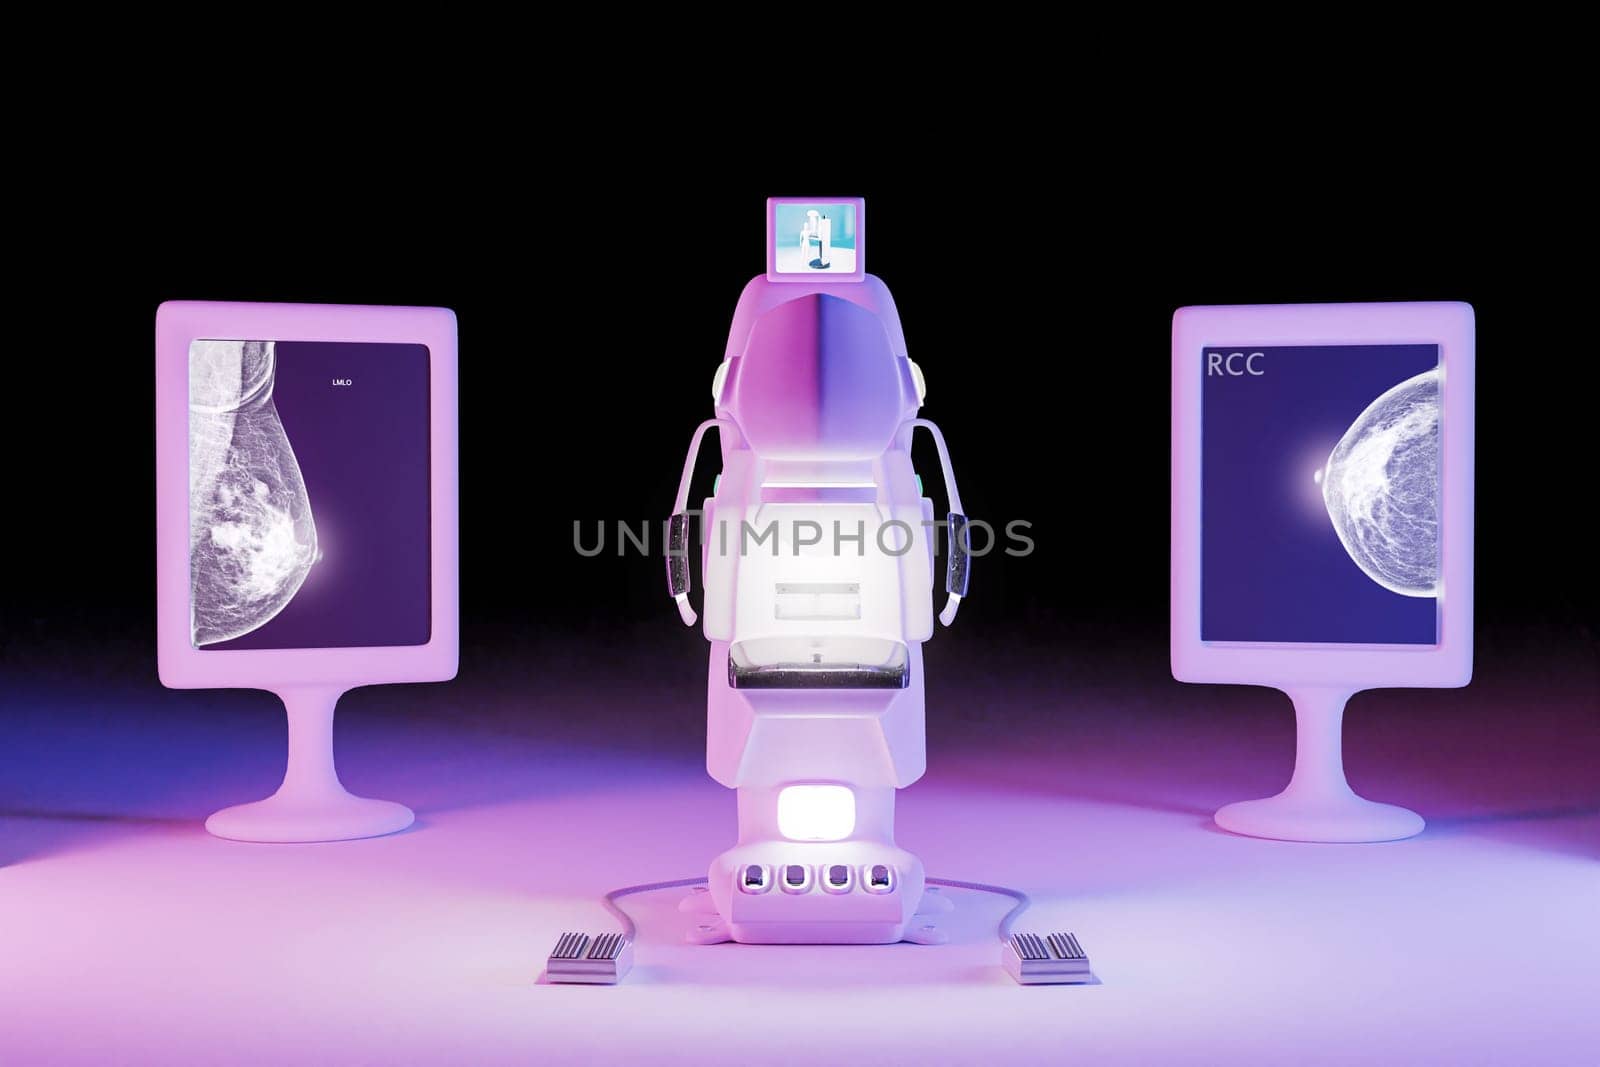 Mammogram device  for screening breast cancer in hospital on pink background. 3D rendering. by samunella